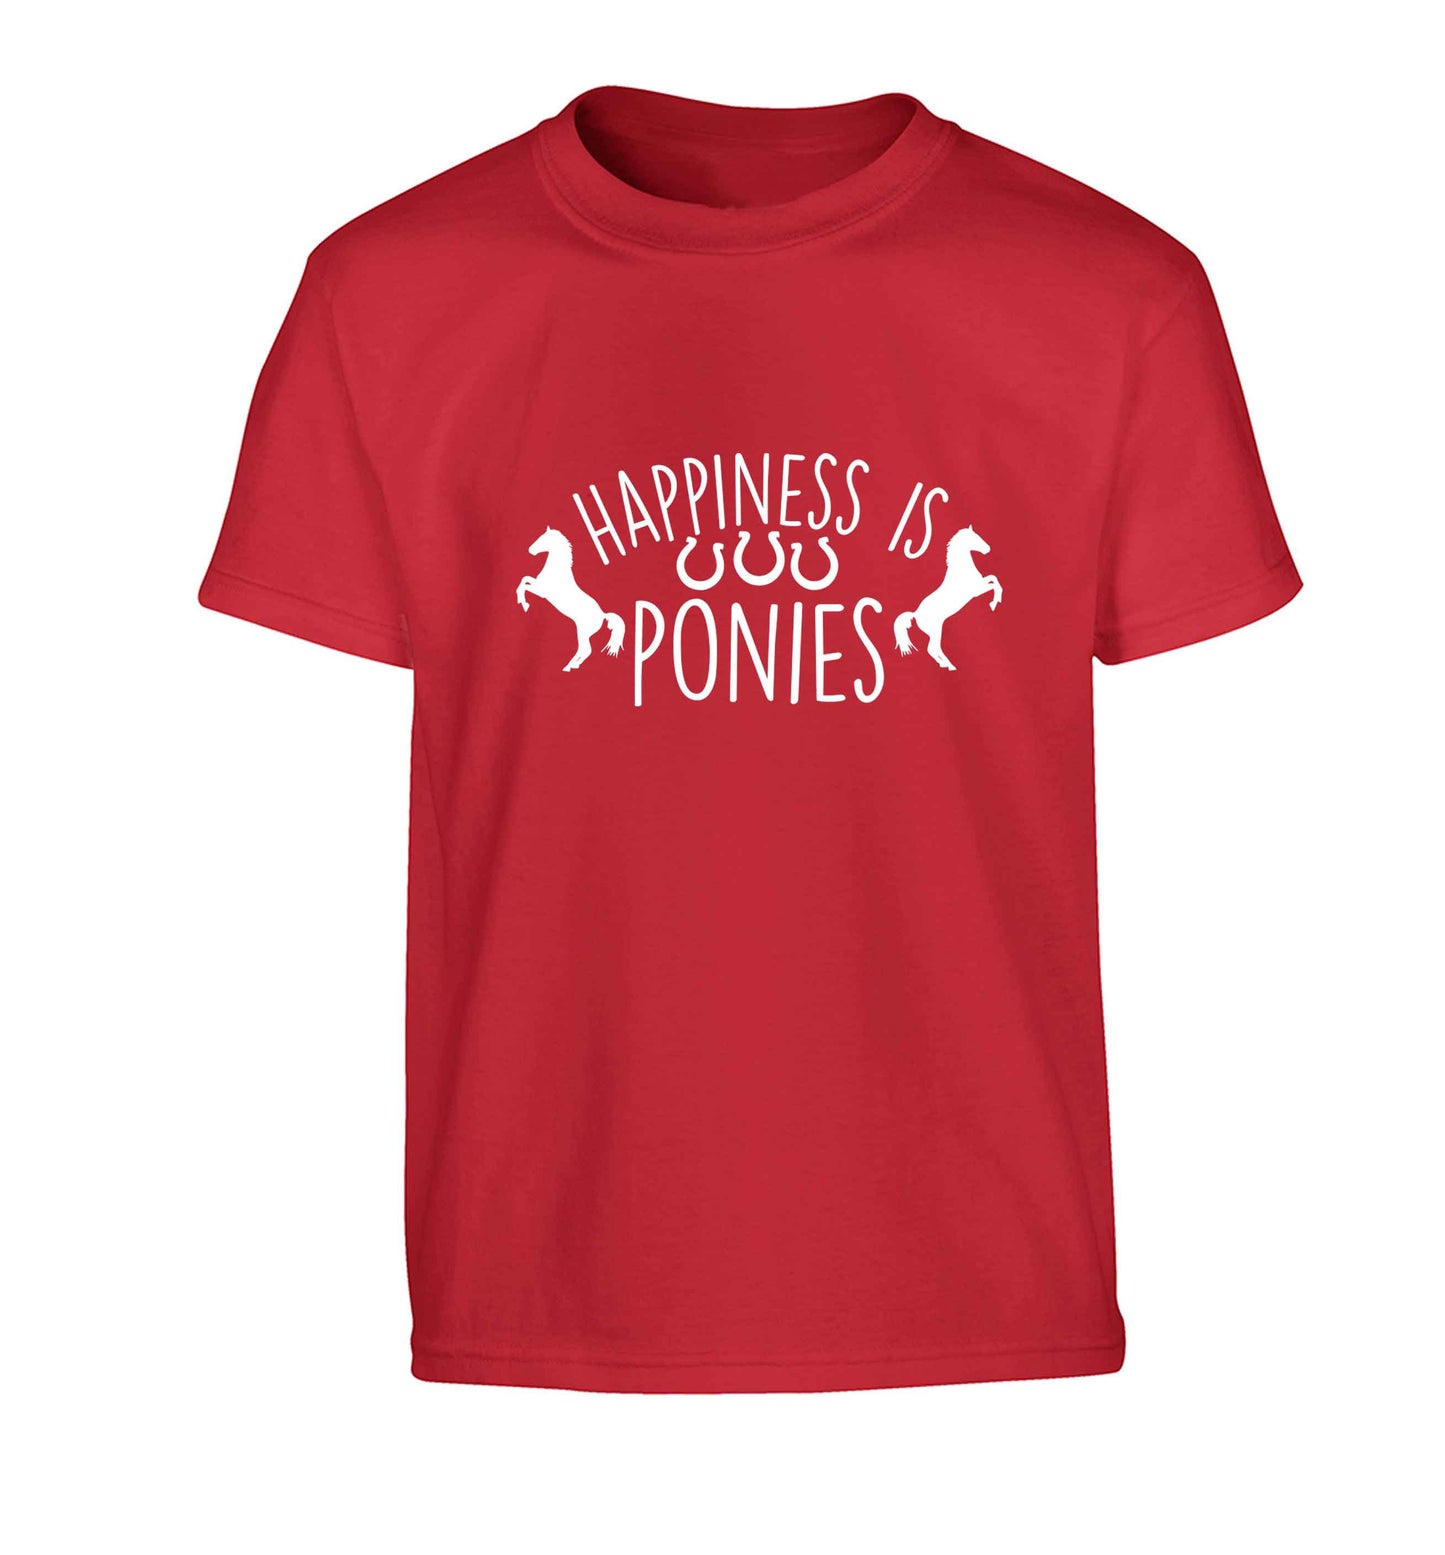 Happiness is ponies Children's red Tshirt 12-13 Years